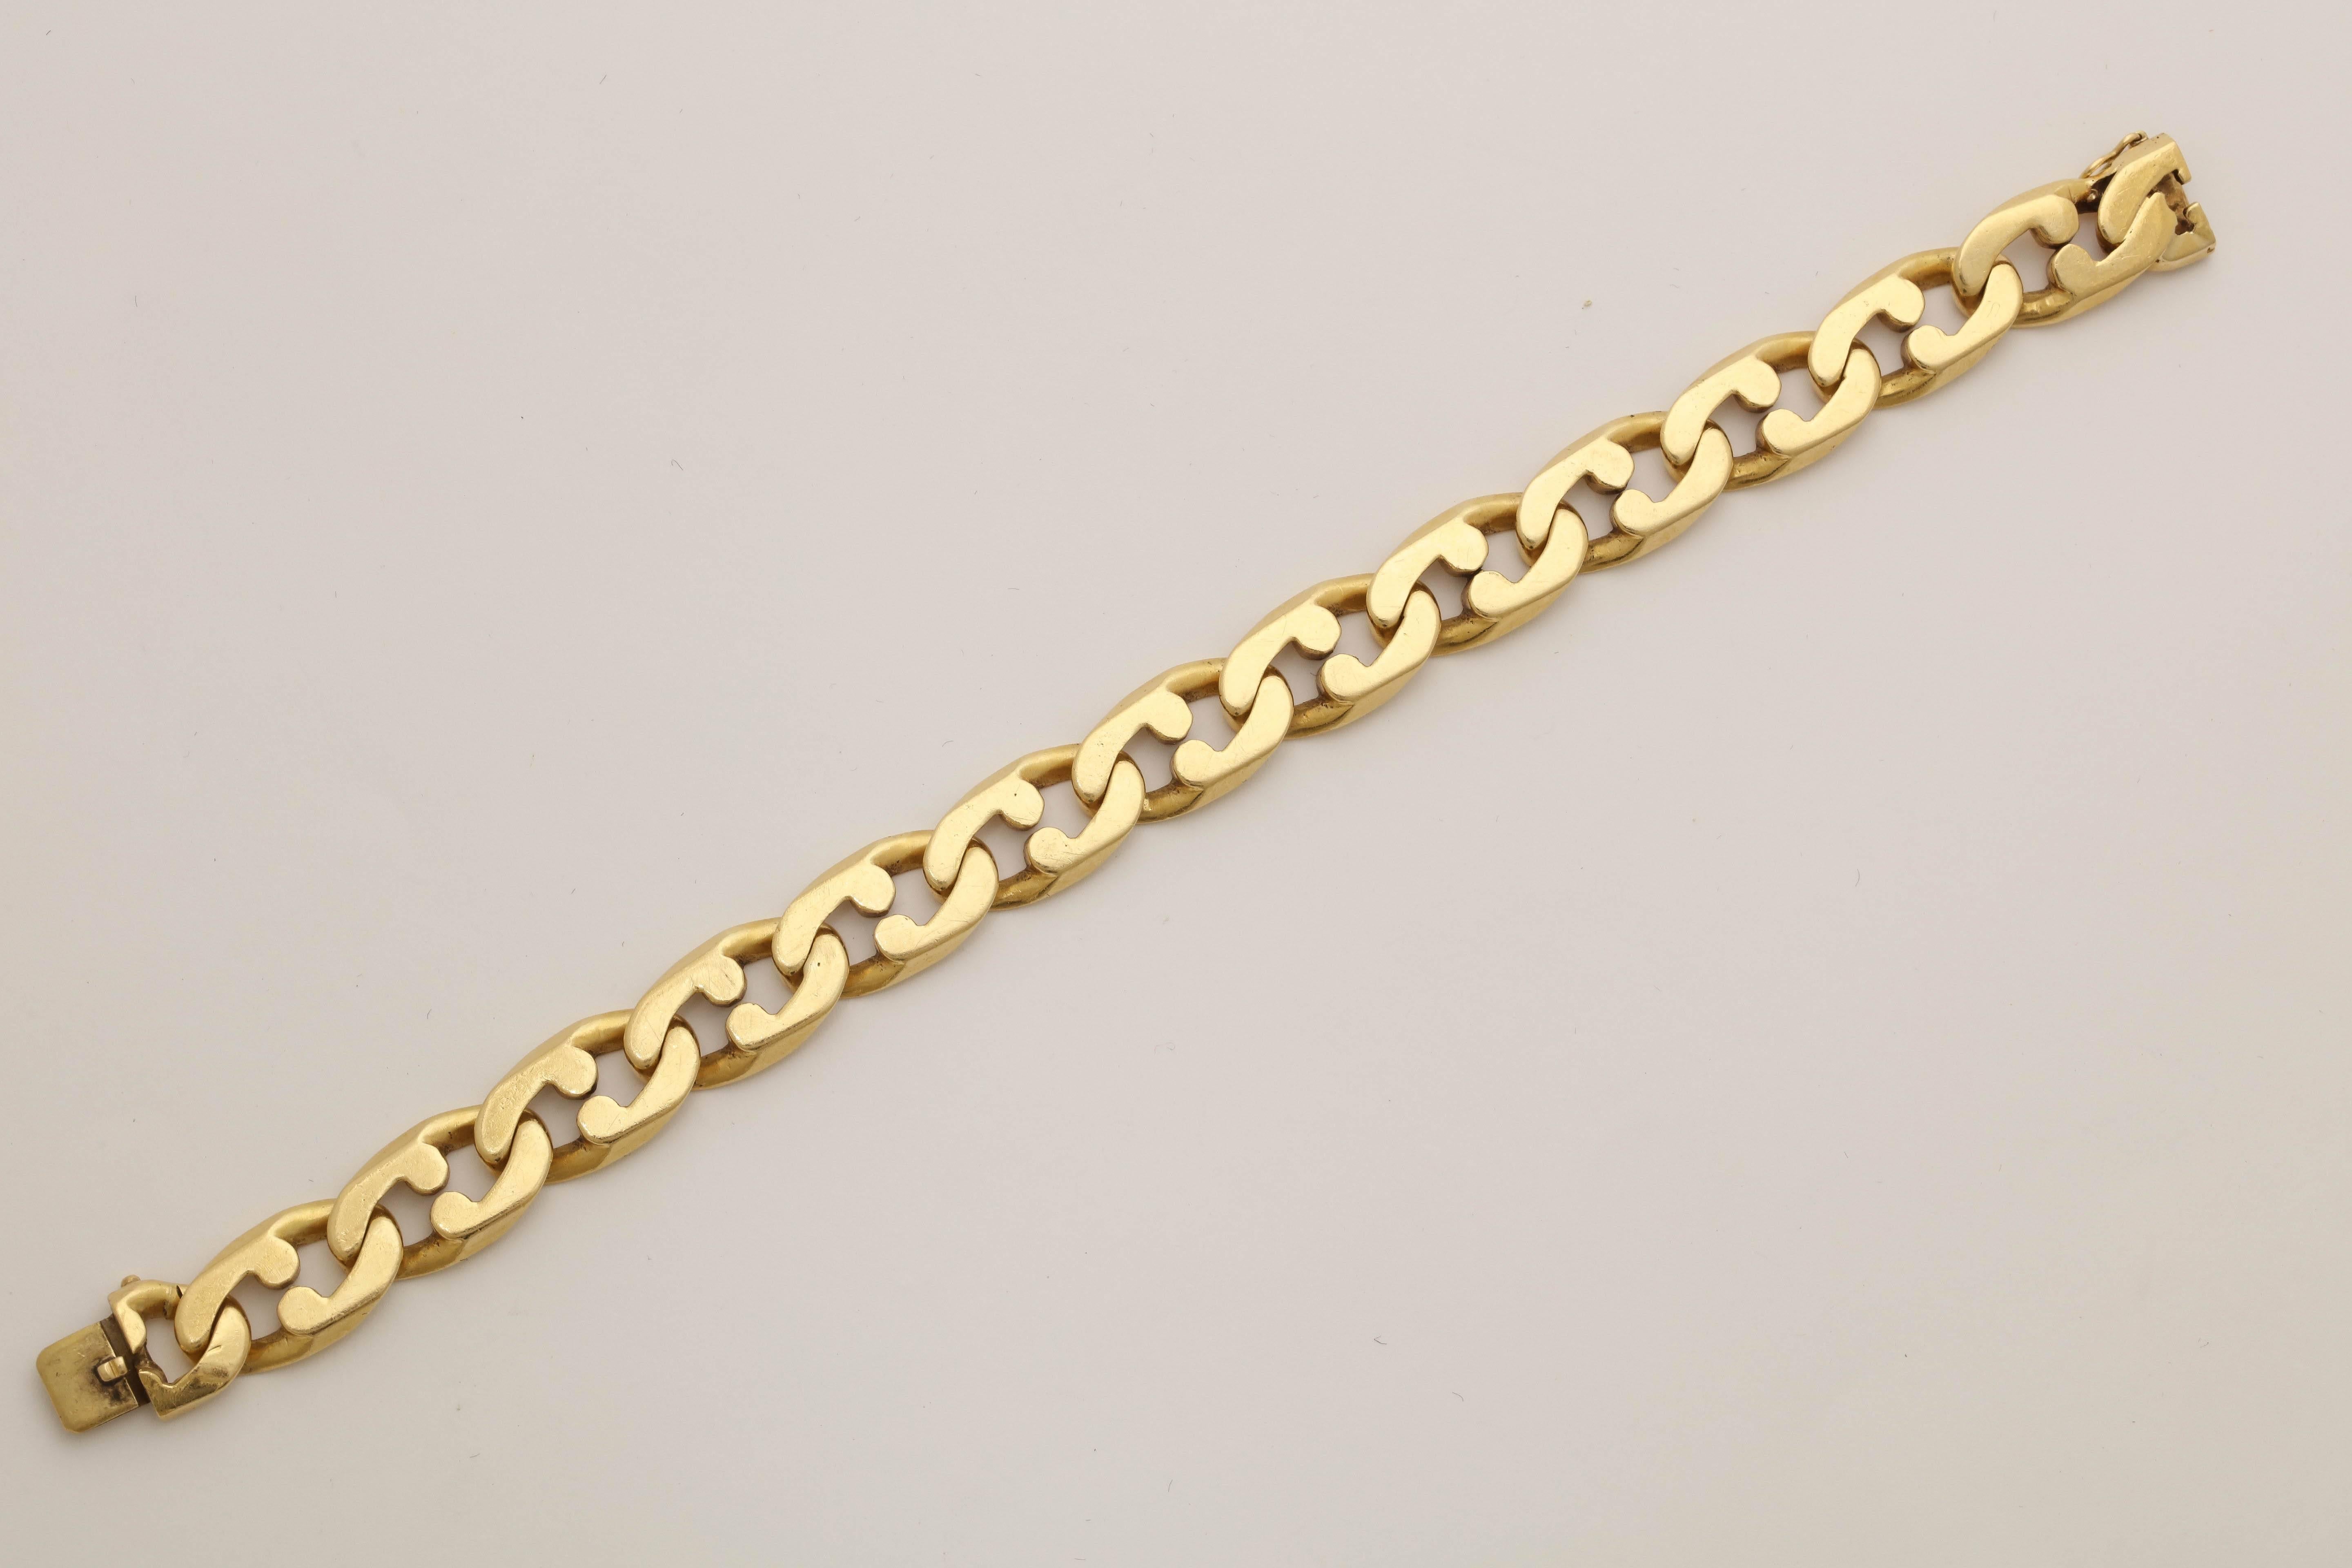 One Unisex Bracelet Designed In 18kt Yellow Gold In a Interlocking Jagged Curb Link Motif. Flexible Bracelet Is Made By Tiffany & Co. In The 1980's In America. Designed With a Figure Eight Safety Mechanism For Extra Security. 